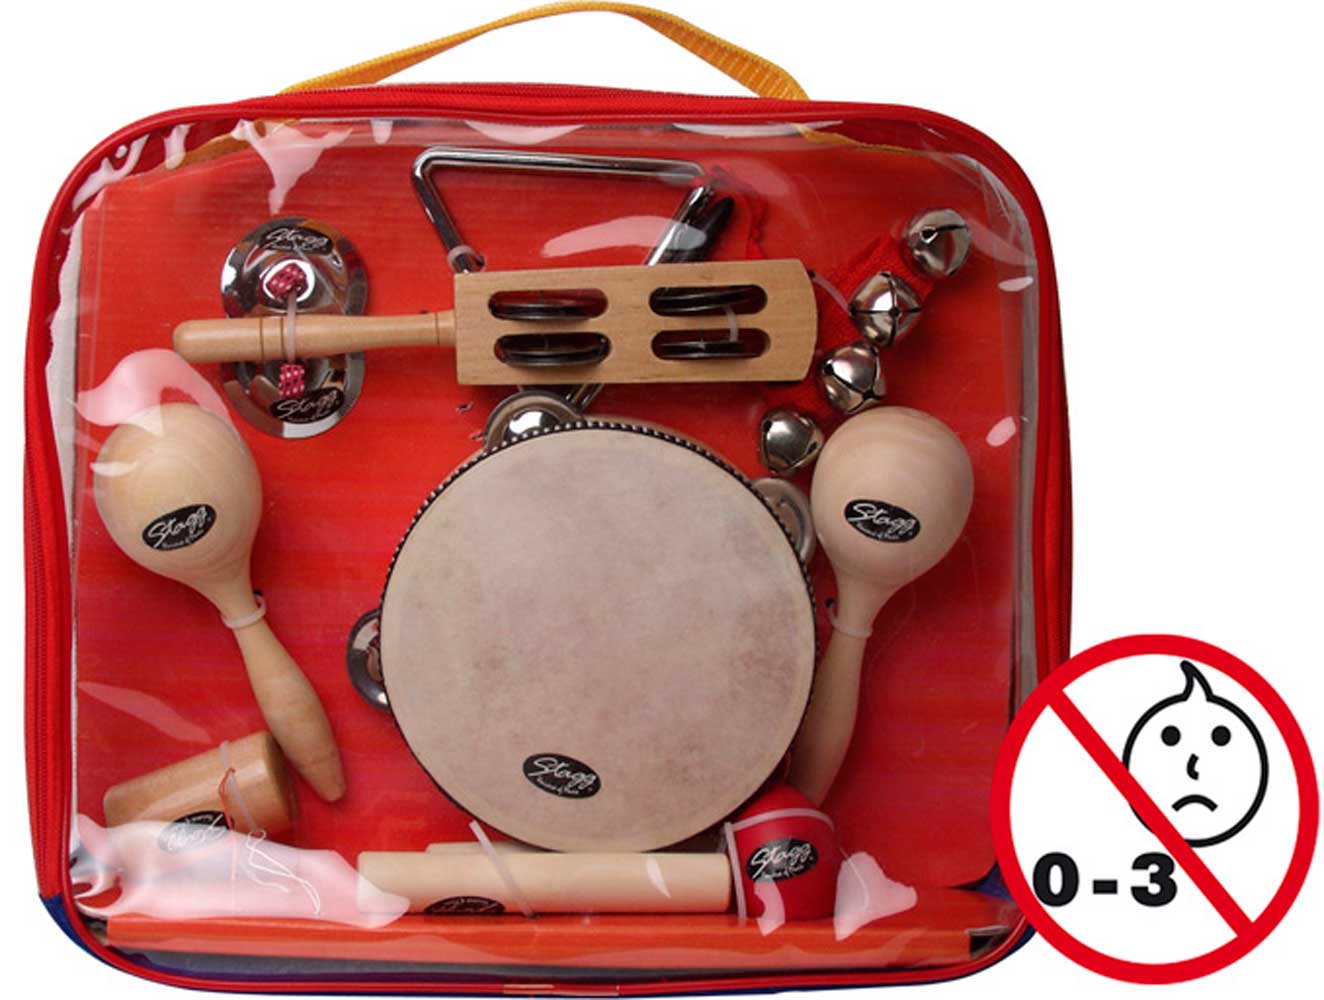 Stagg Kit Percussion Enfants Cpk-01 - - Percussion set for kids - Variation 1